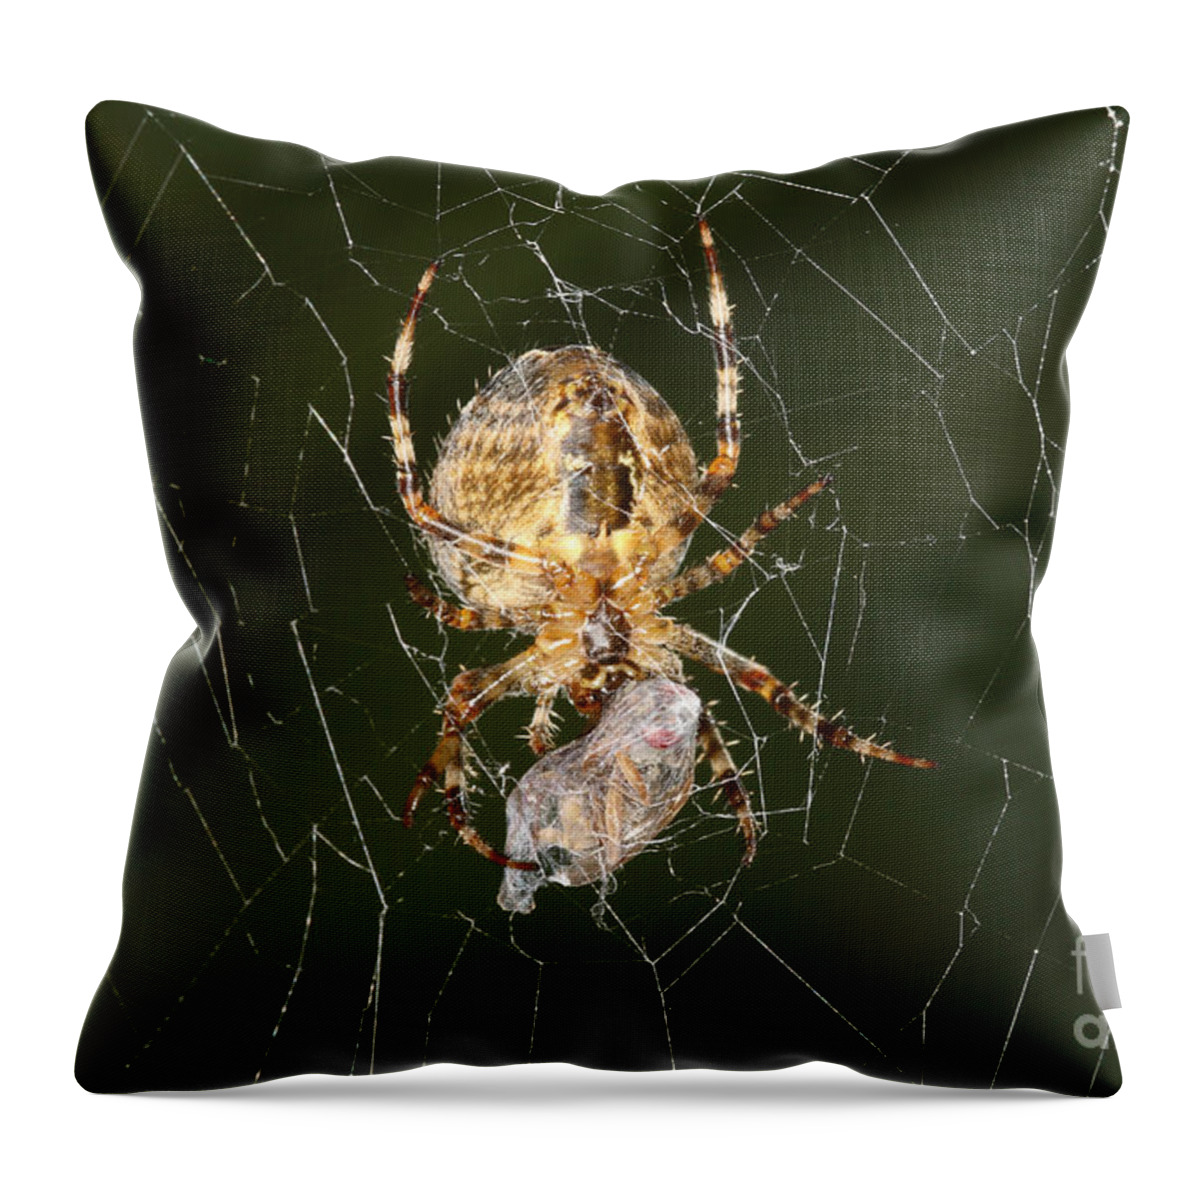 Animal Throw Pillow featuring the photograph Marbled Orb Weaver Spider Eating by Ted Kinsman